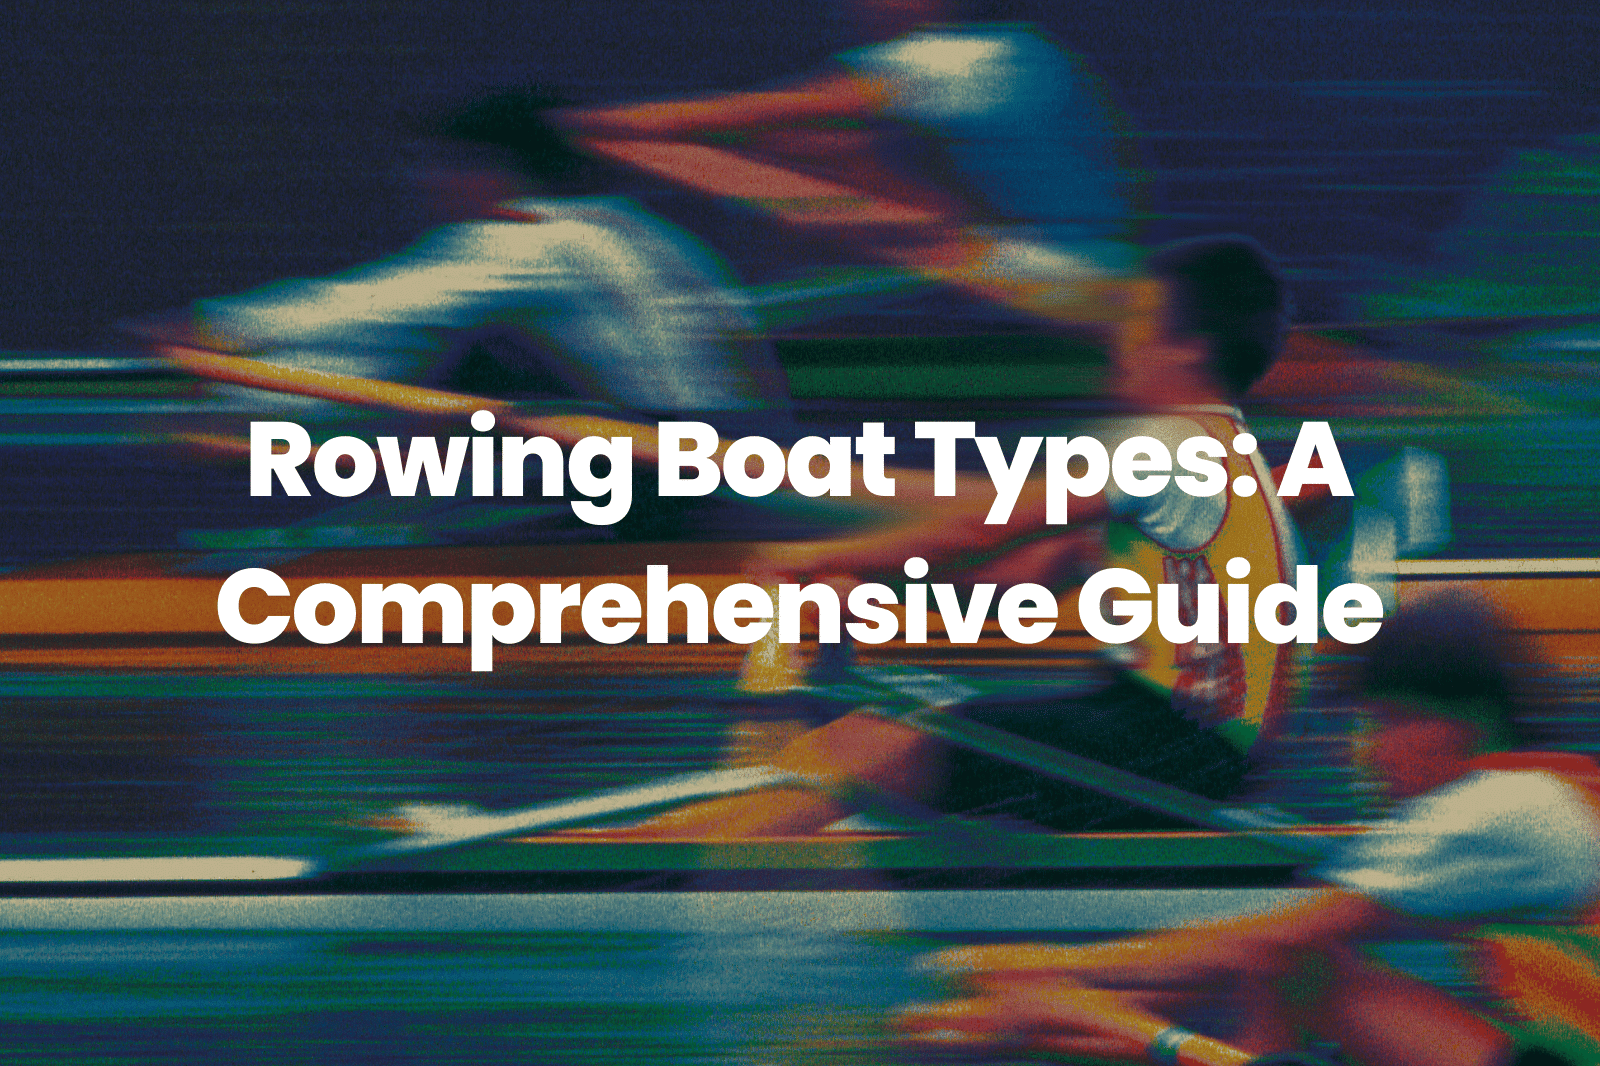 Rowing Boat Types: A Comprehensive Guide